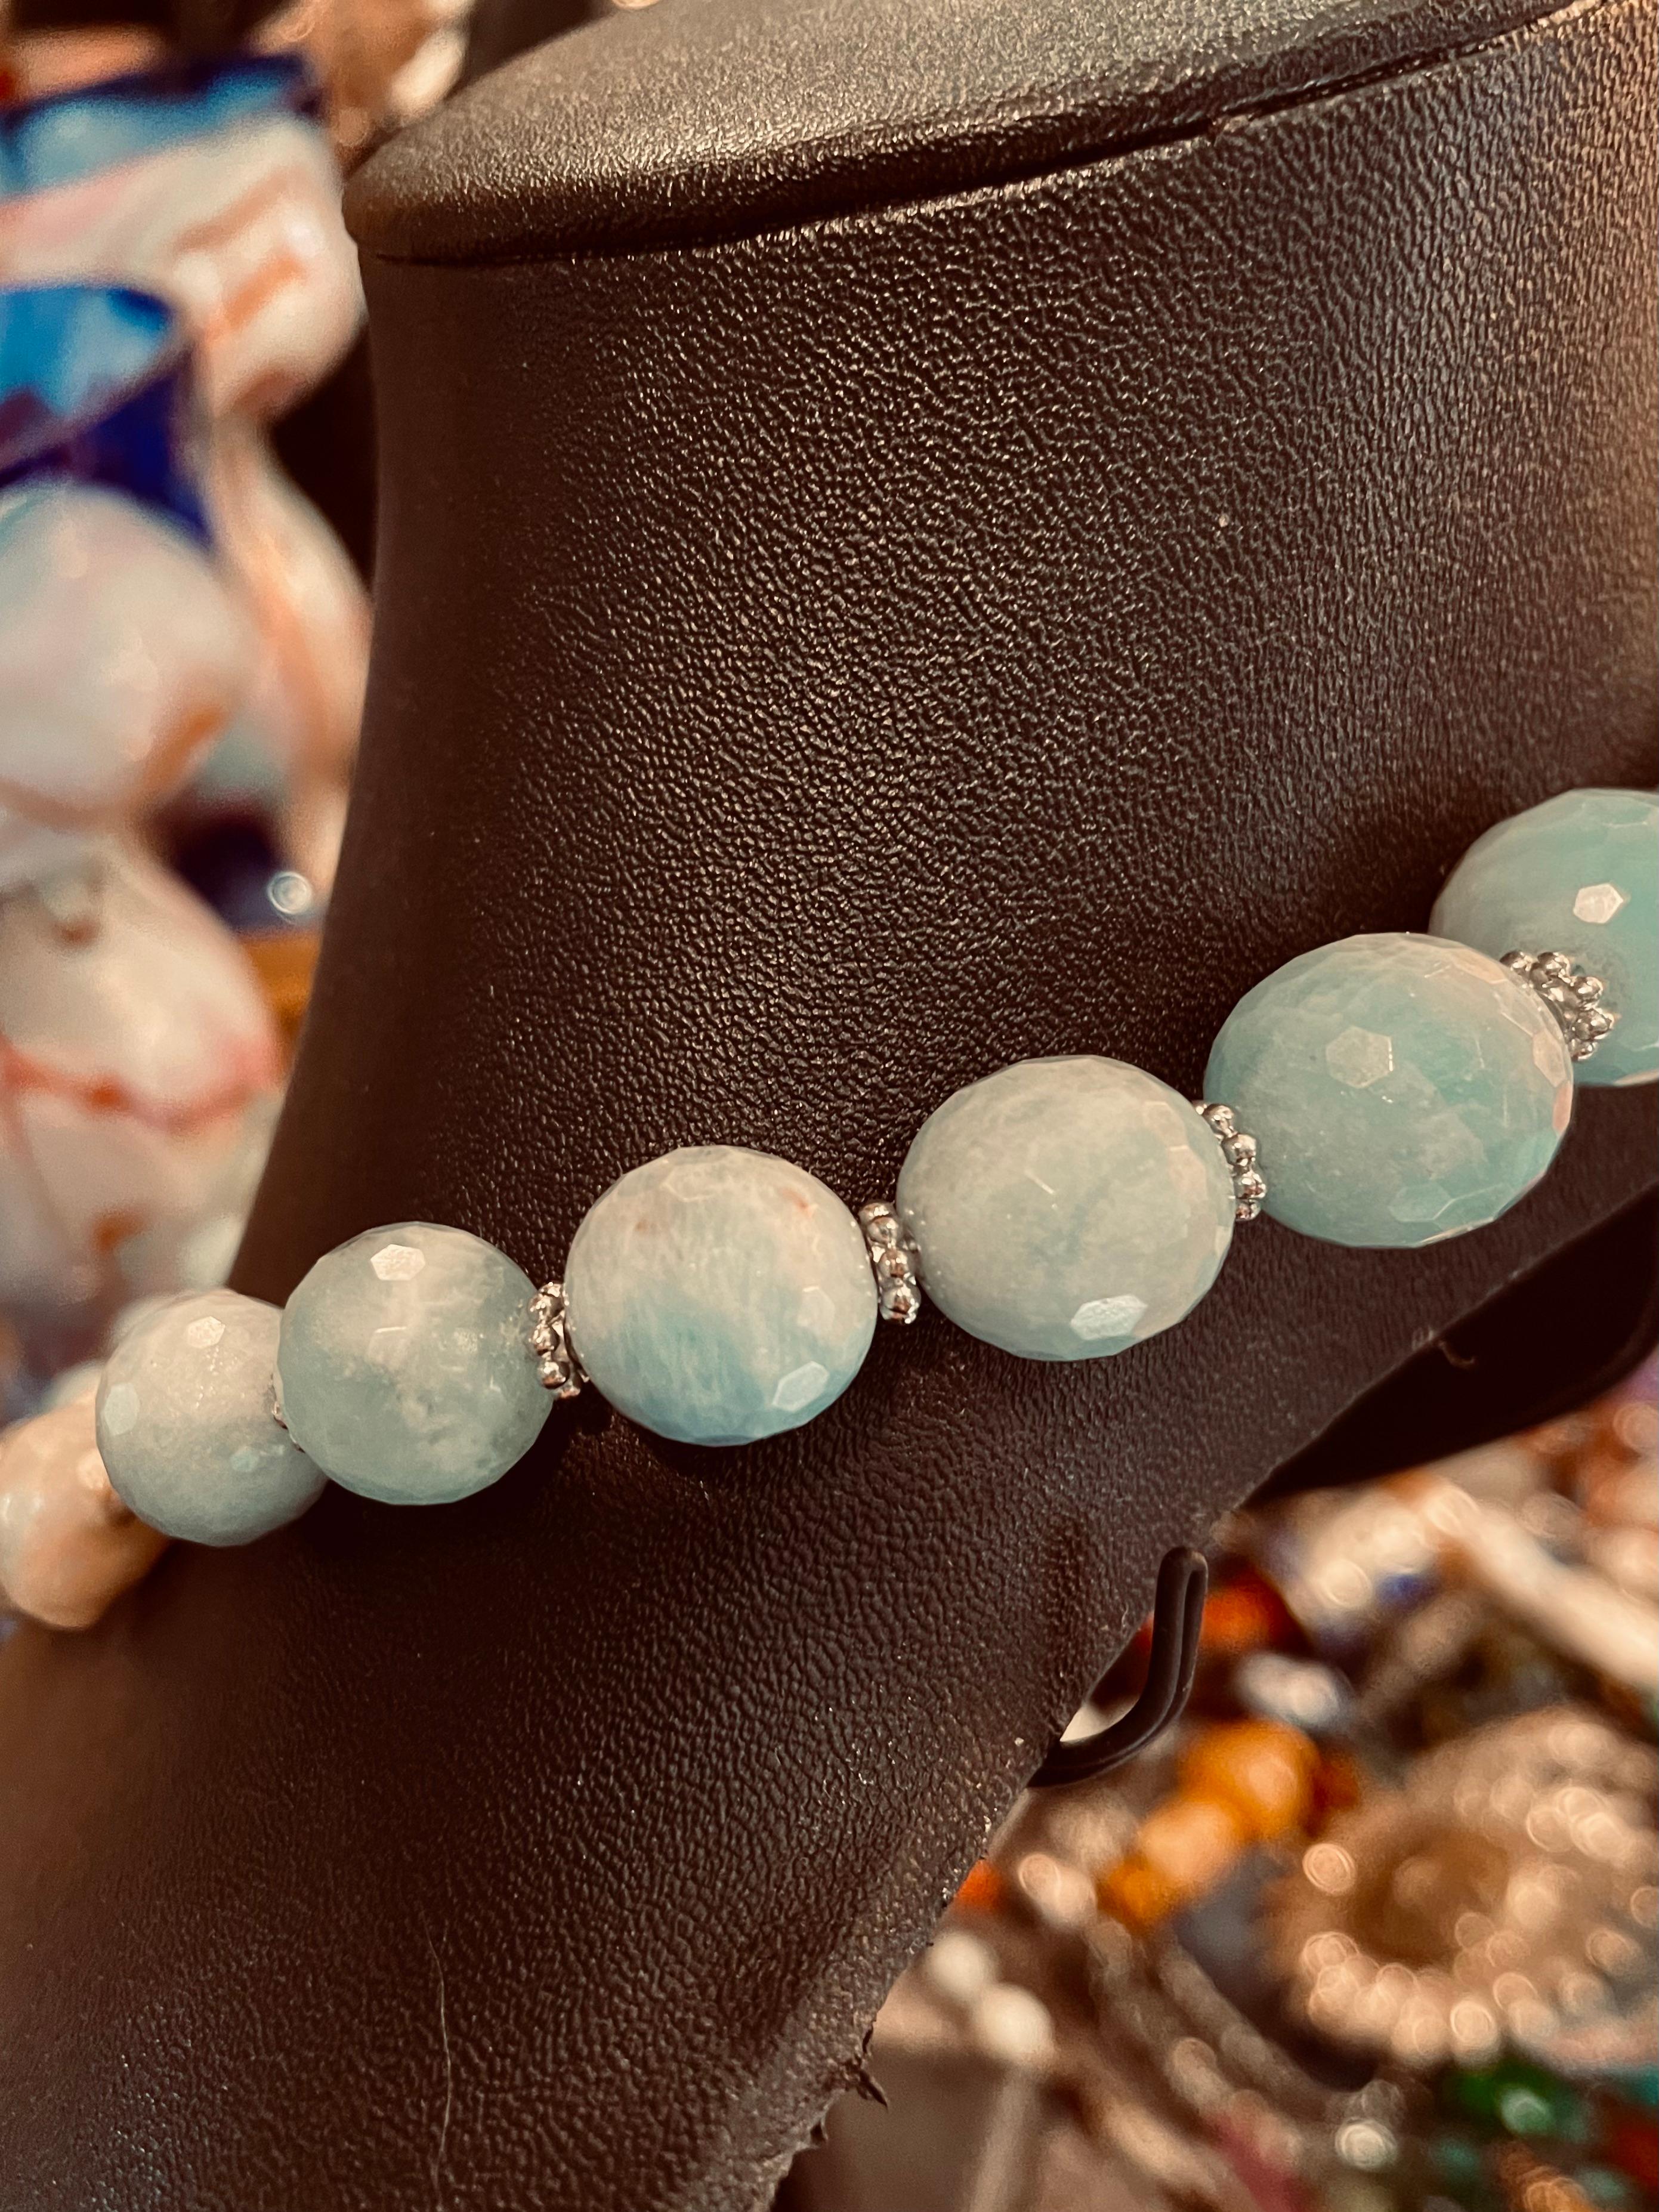 Lorraine’s Bijoux offers a Stunning necklace with Large Blue Aquamarine faceted beads, luscious large White  Baroque Freshwater Pearls, faceted pyrite spacer beads, Sterling Silver vintage Mexican beads. This is a very gorgeous necklace that will